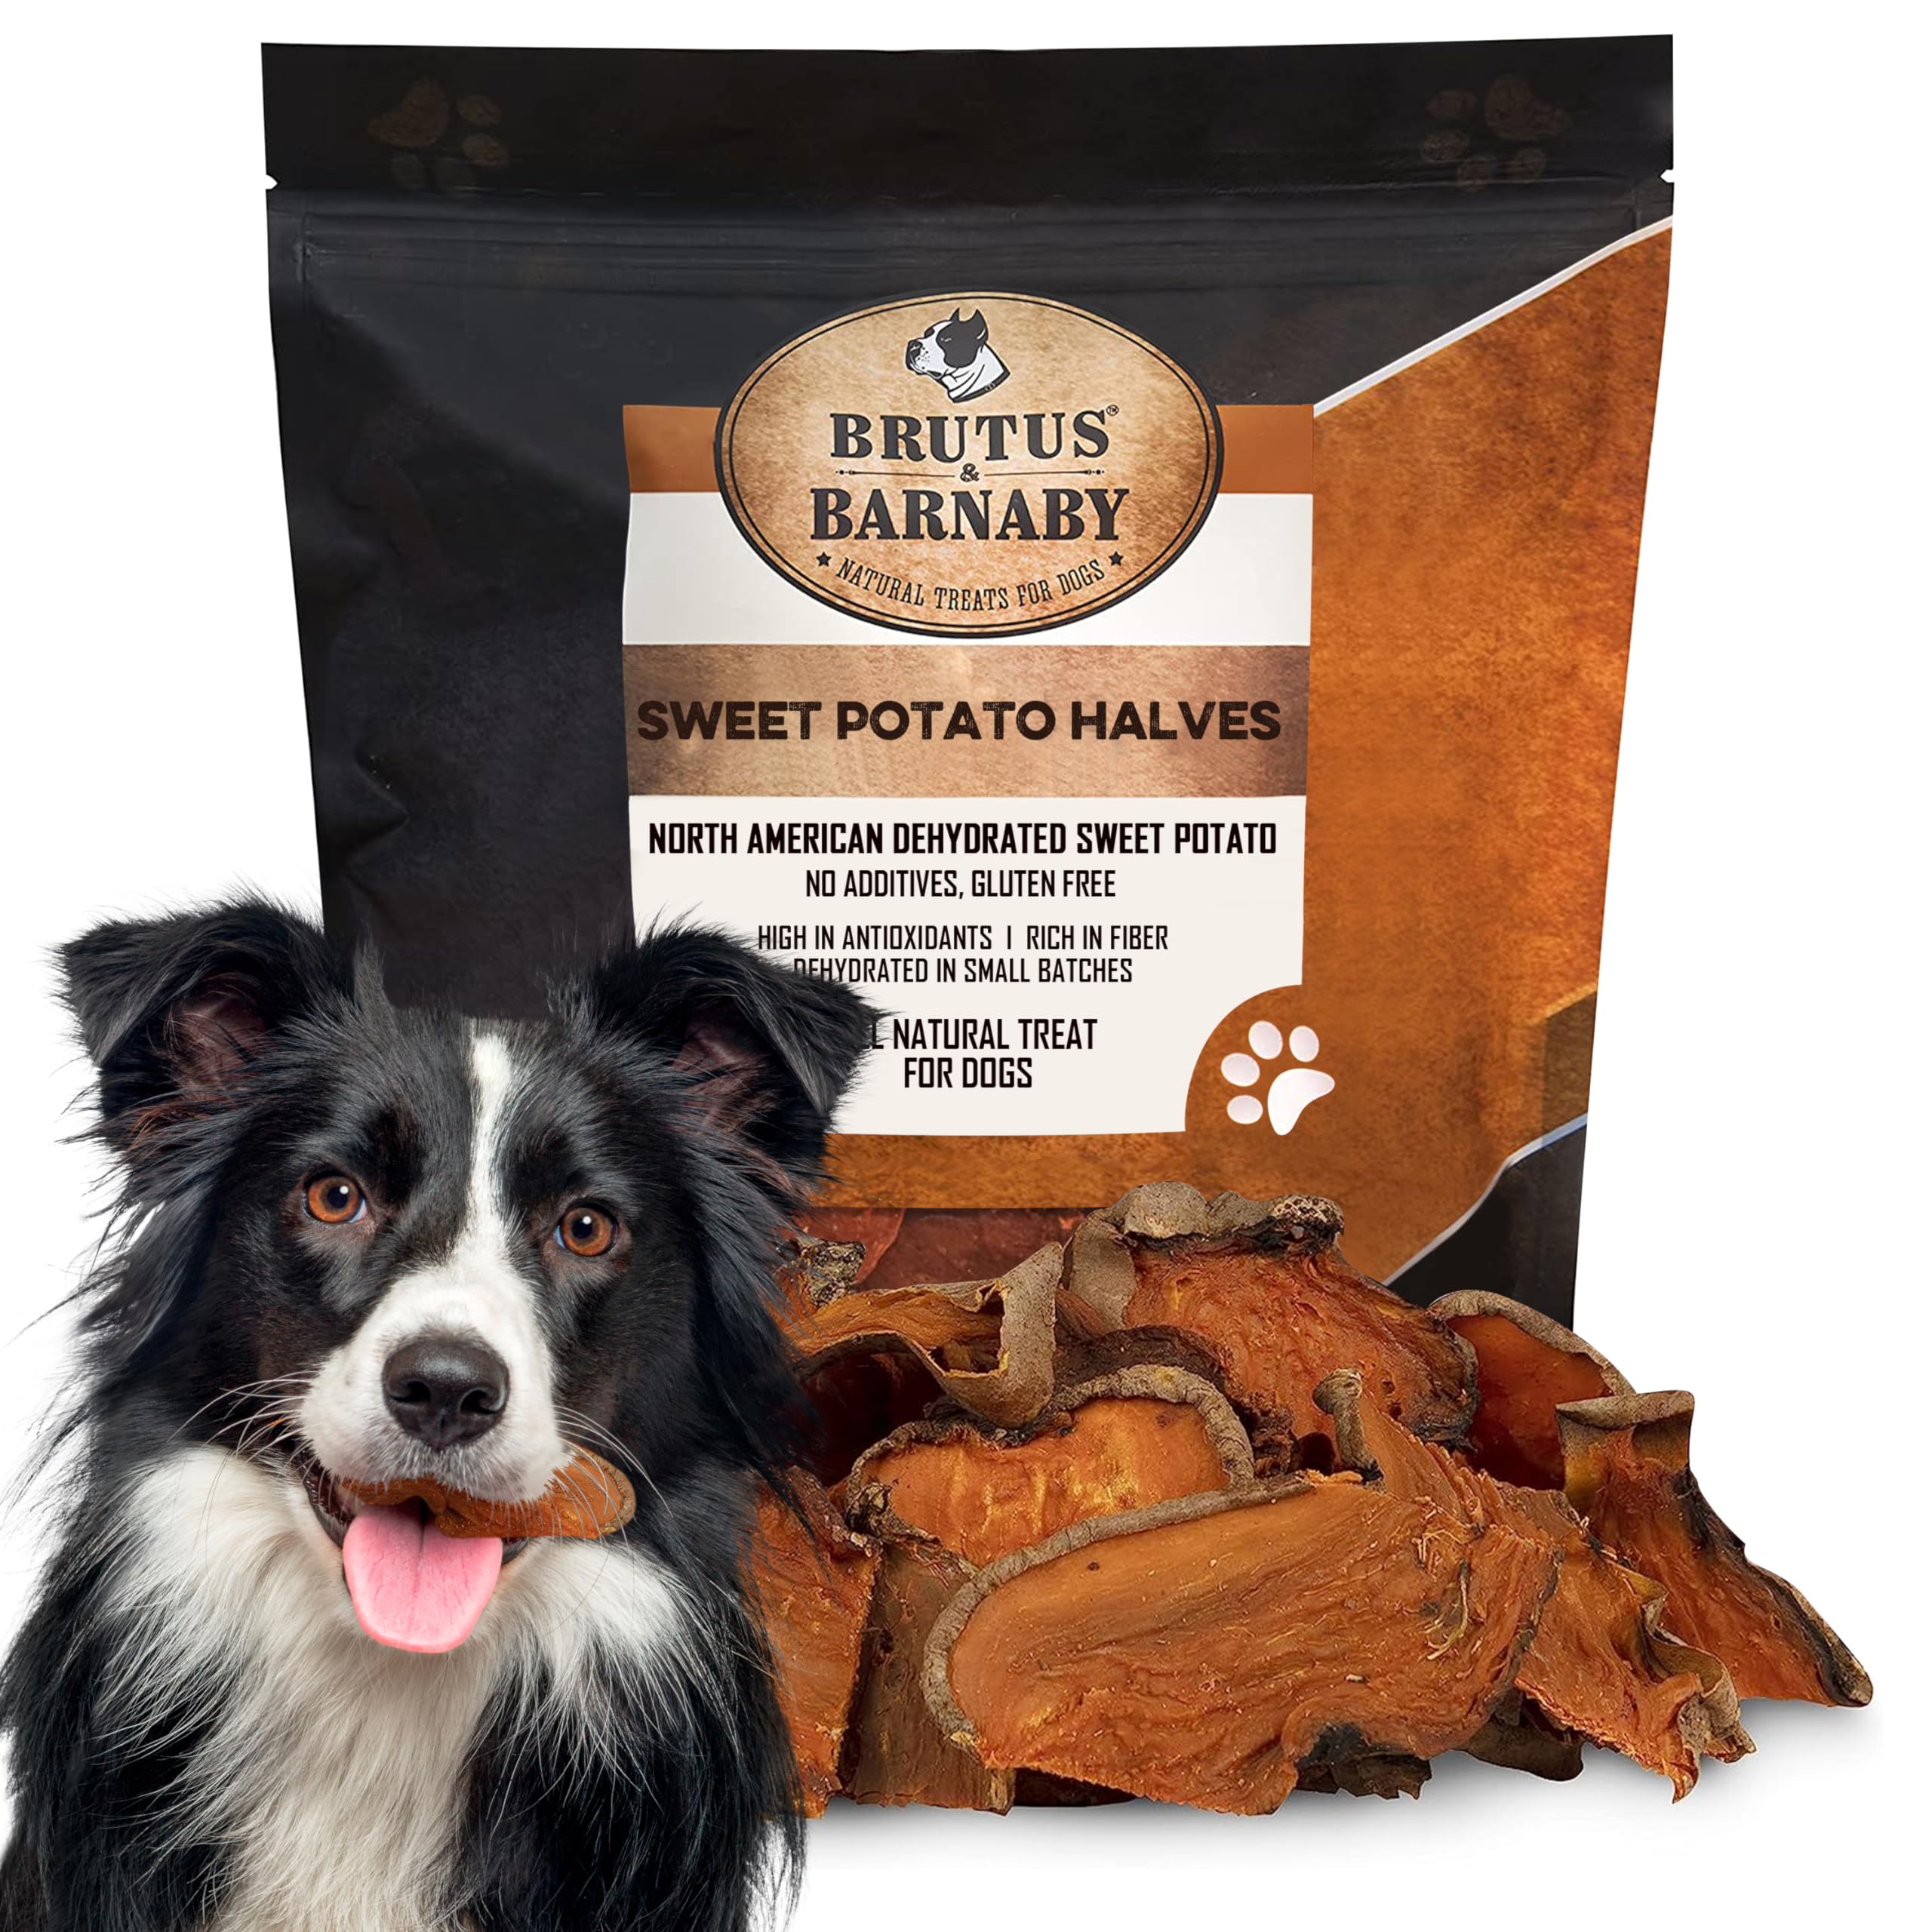 Brutus & Barnaby Sweet Potato Slices For Dogs - Half Slices, 2 lbs - Single Ingredient Grain Free Dog Treats, Best High Anti-Oxidant Healthy 100%